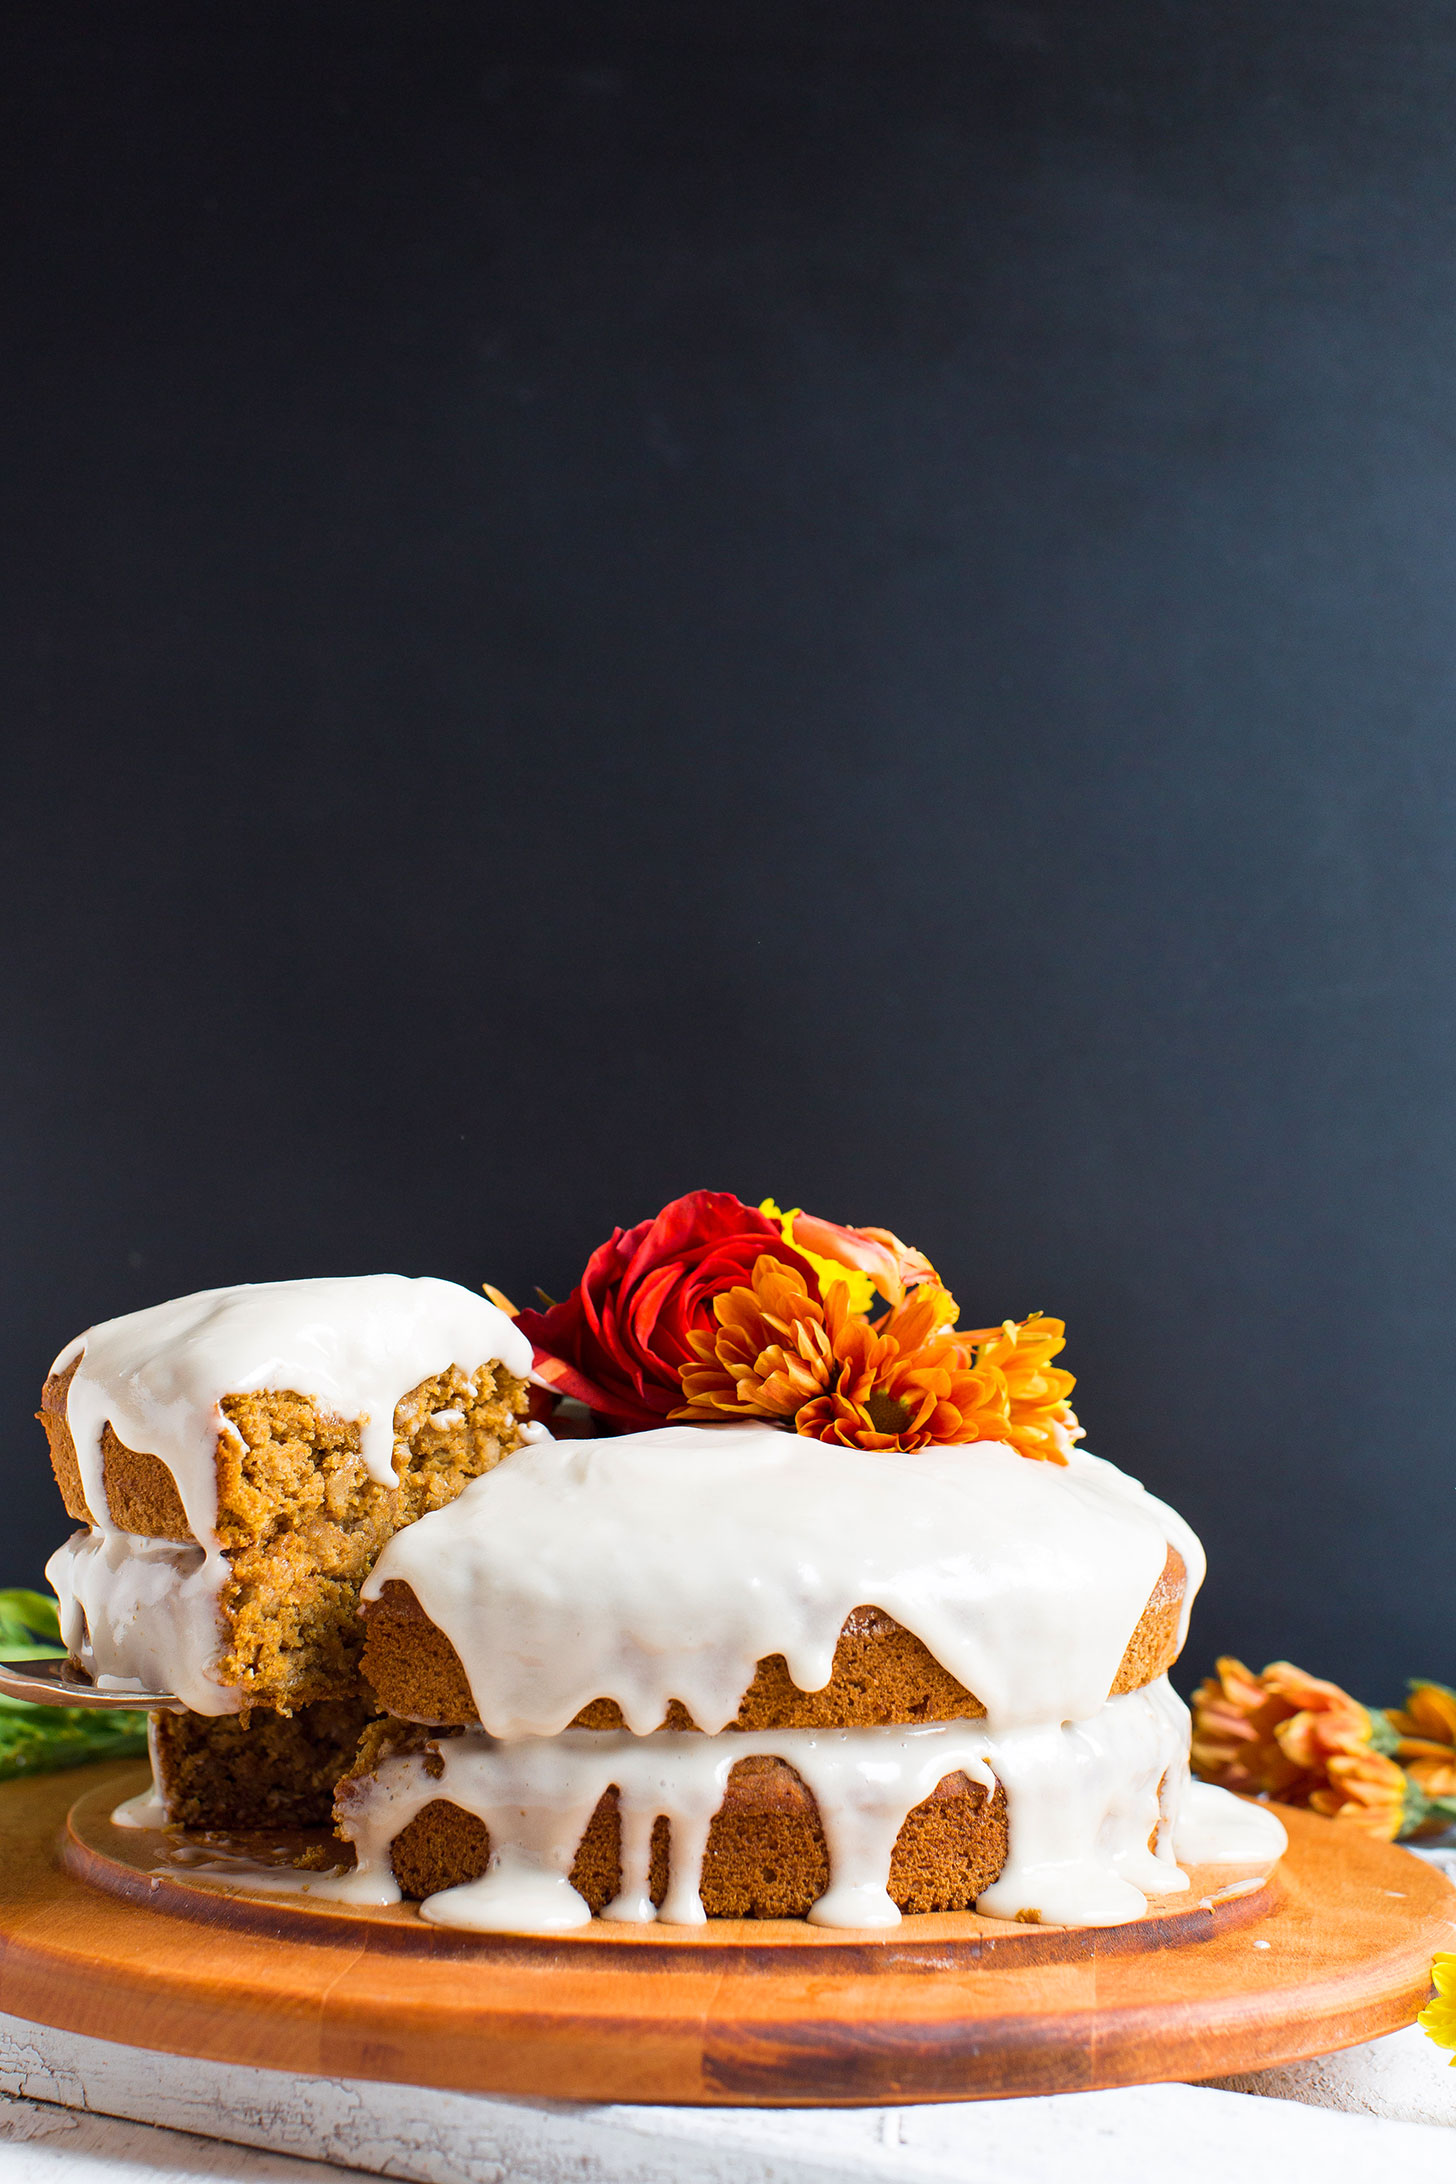 Our gluten-free vegan Pumpkin Cake recipe with glaze and decorated with flowers